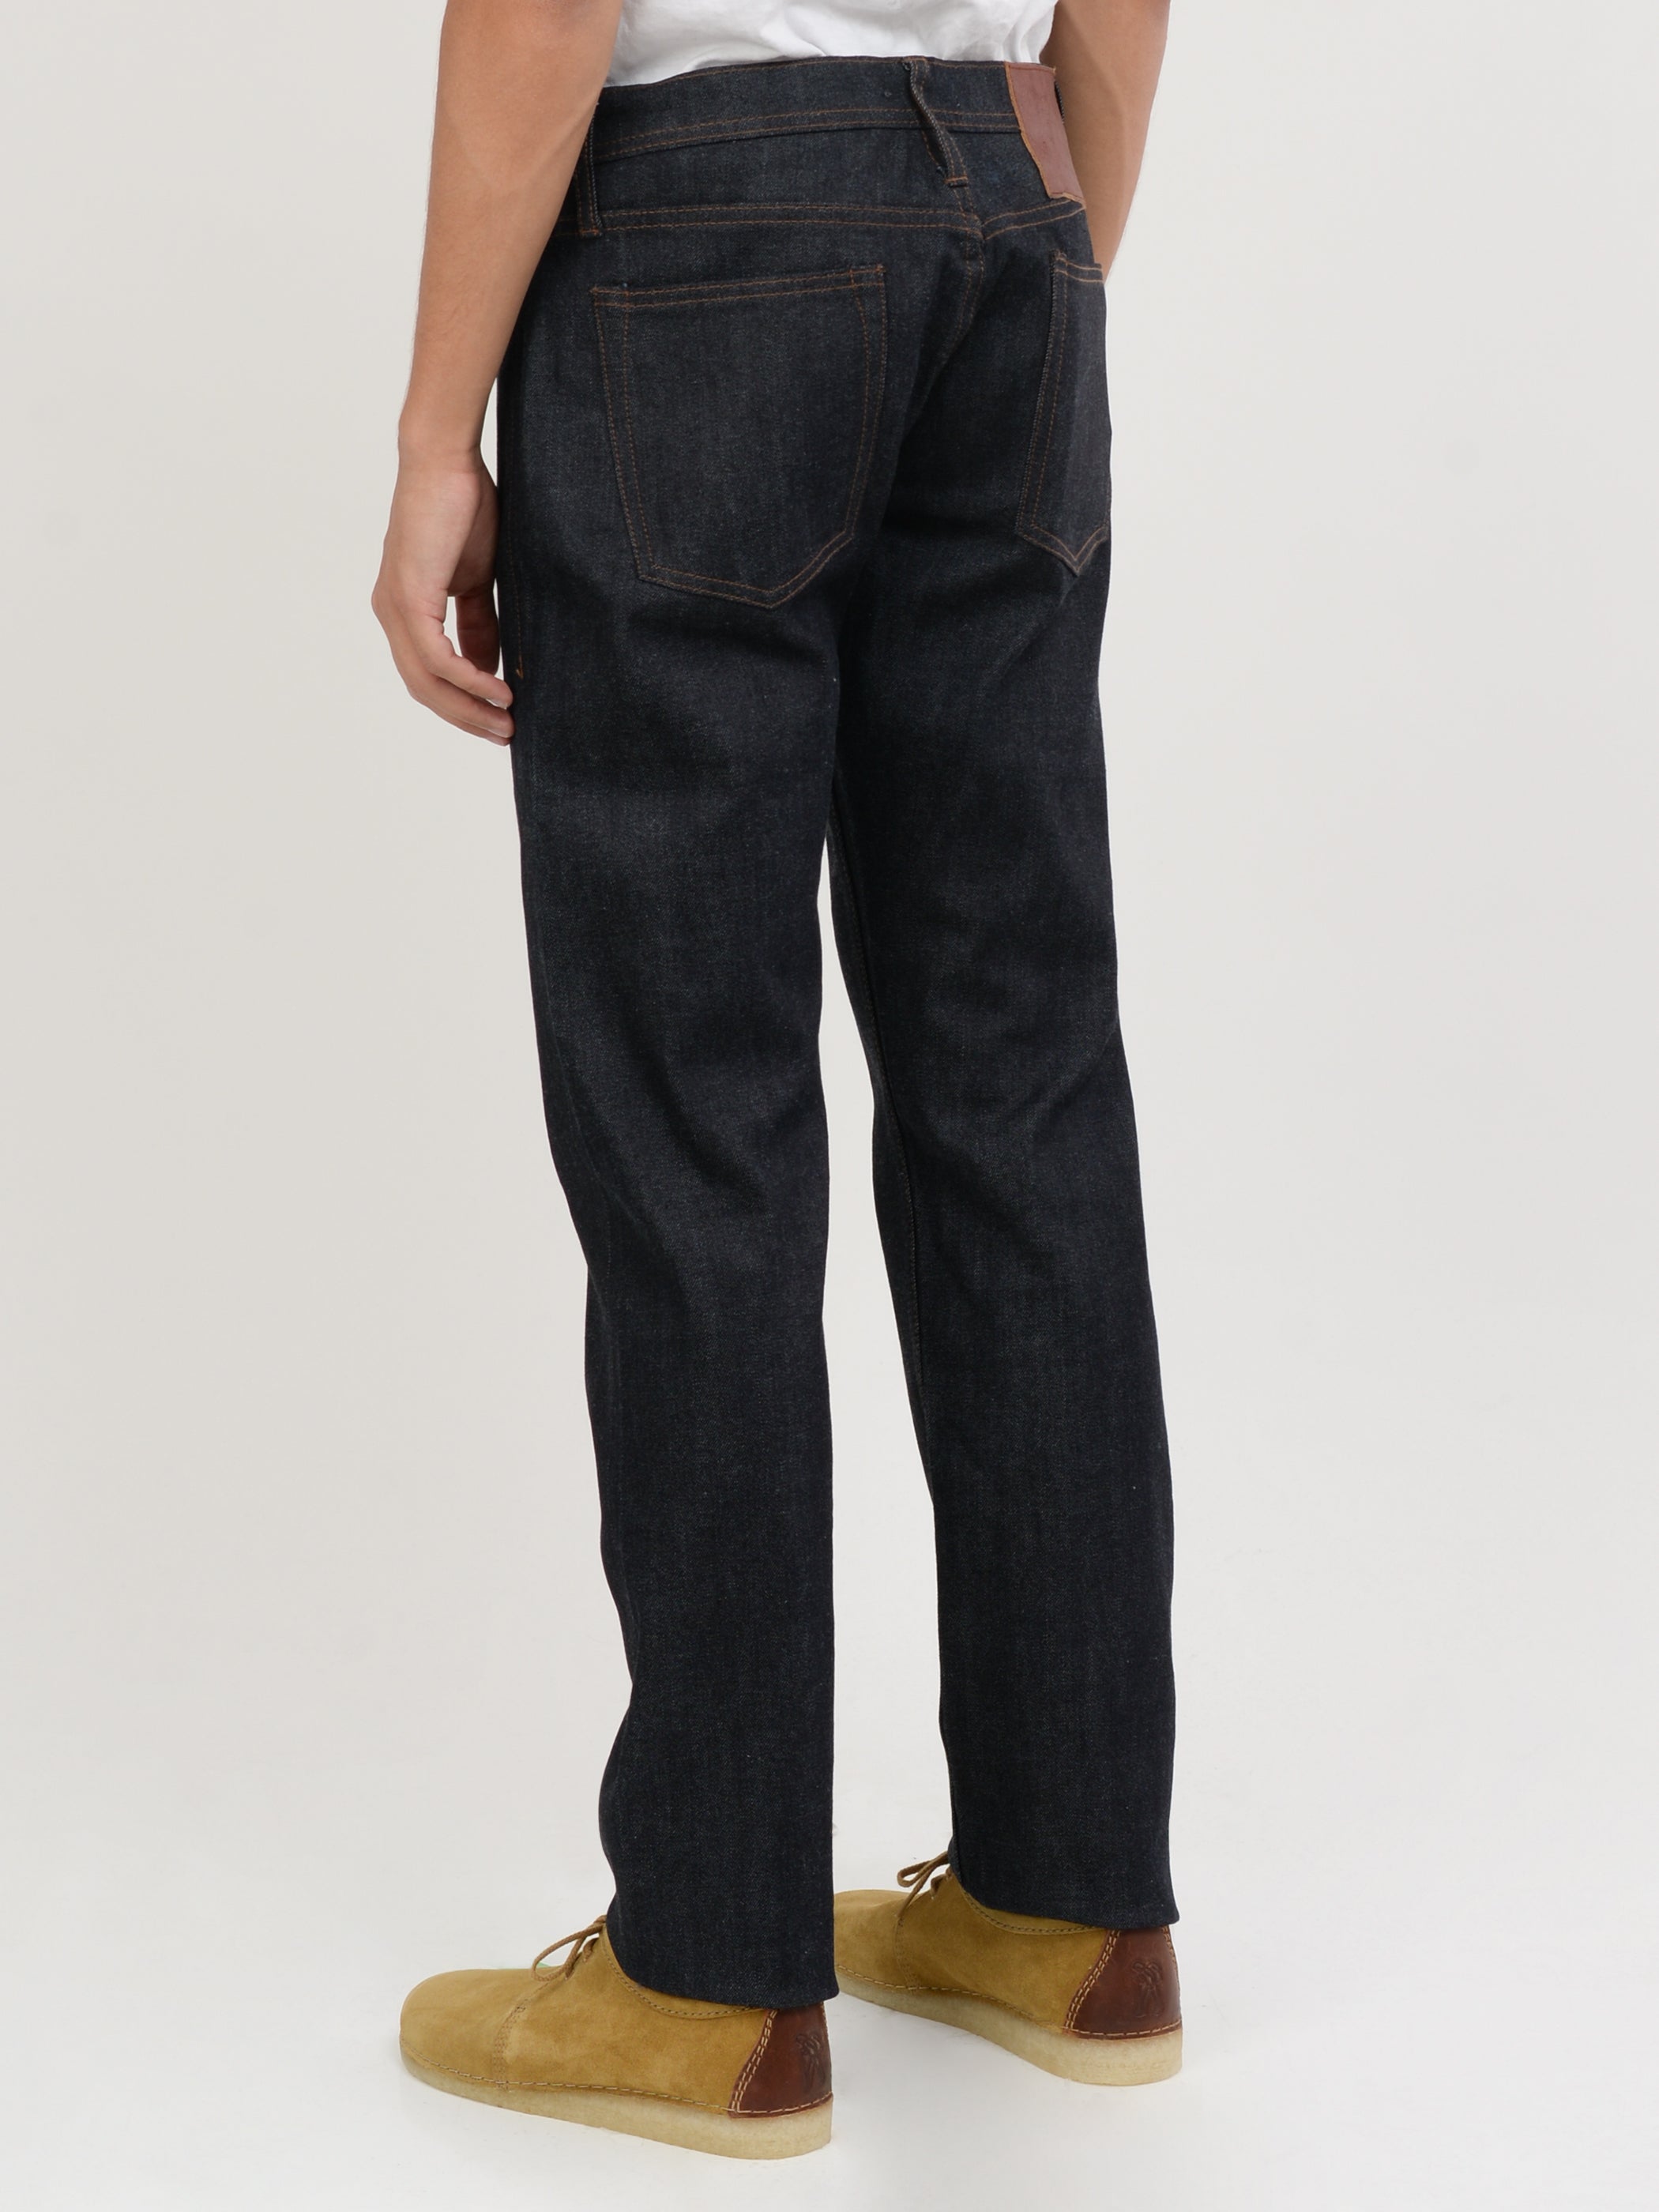 Unbranded Brand- UB322 Straight Fit 11oz Stretch Selvedge – TRADE Supply Co.